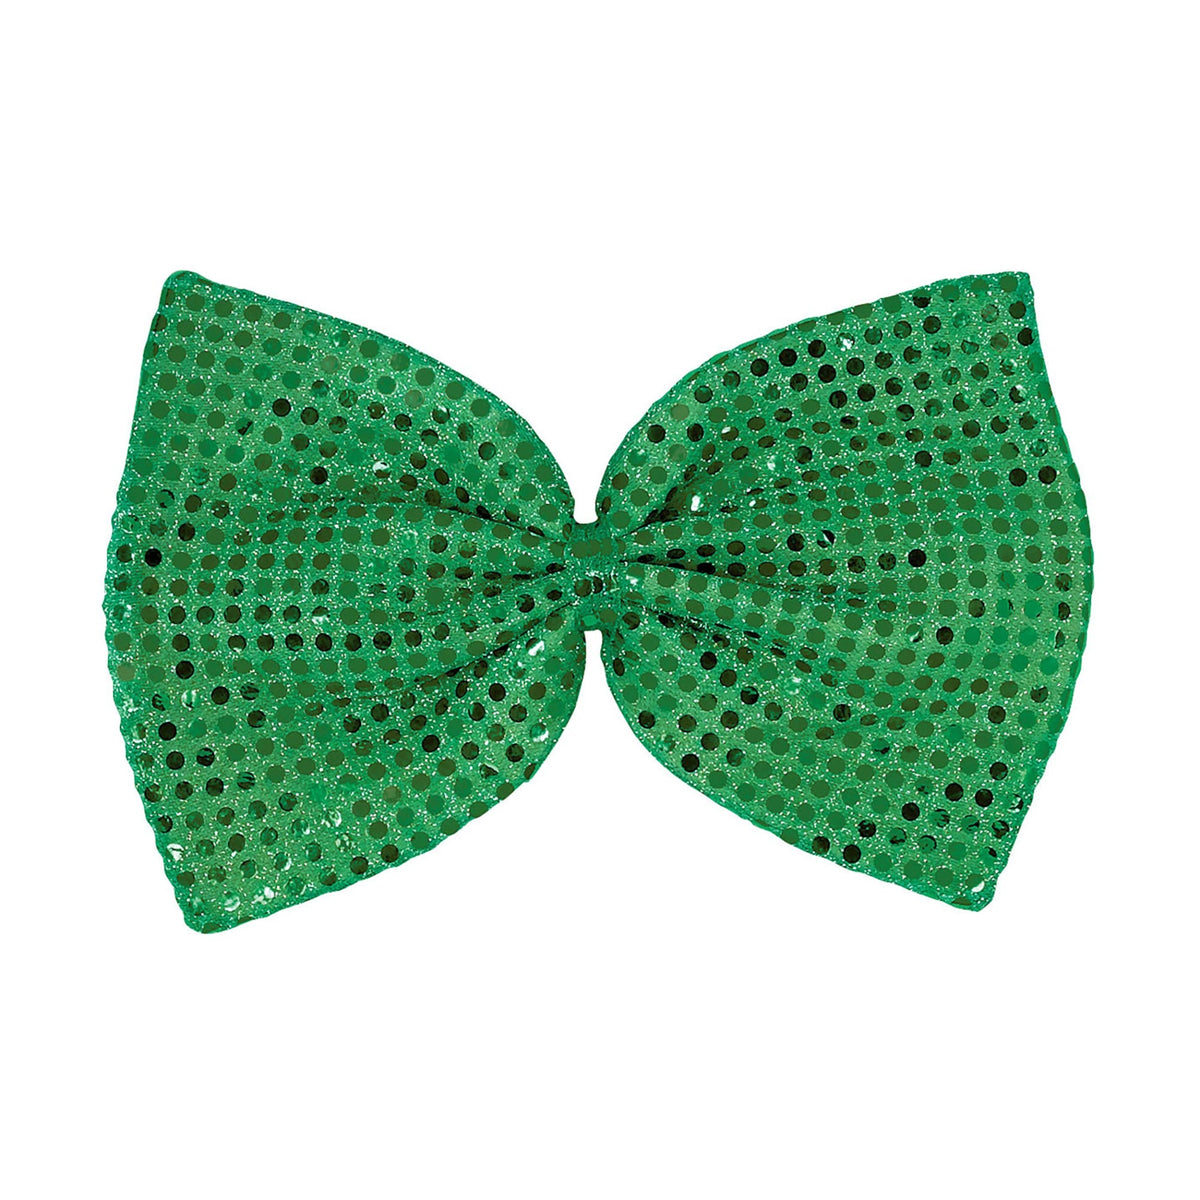 AMSCAN CA St-Patrick St-Patrick's Day Giant Sequin Green Bowtie, 1 Count